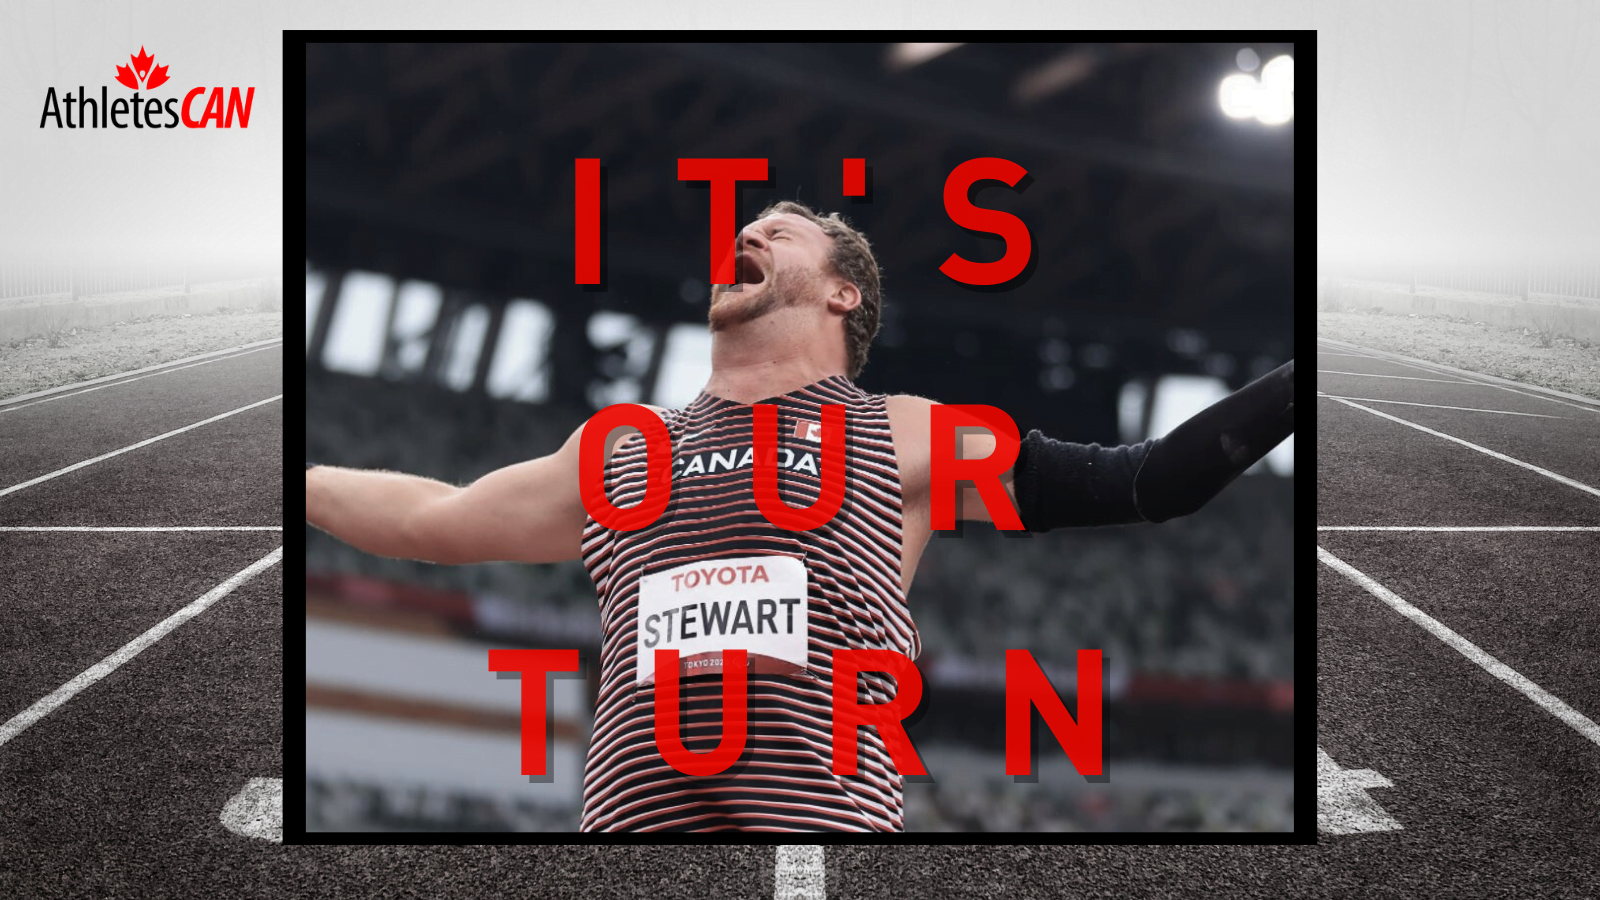 AthletesCAN launches “It’s Our Turn” athlete-centred marketing campaign